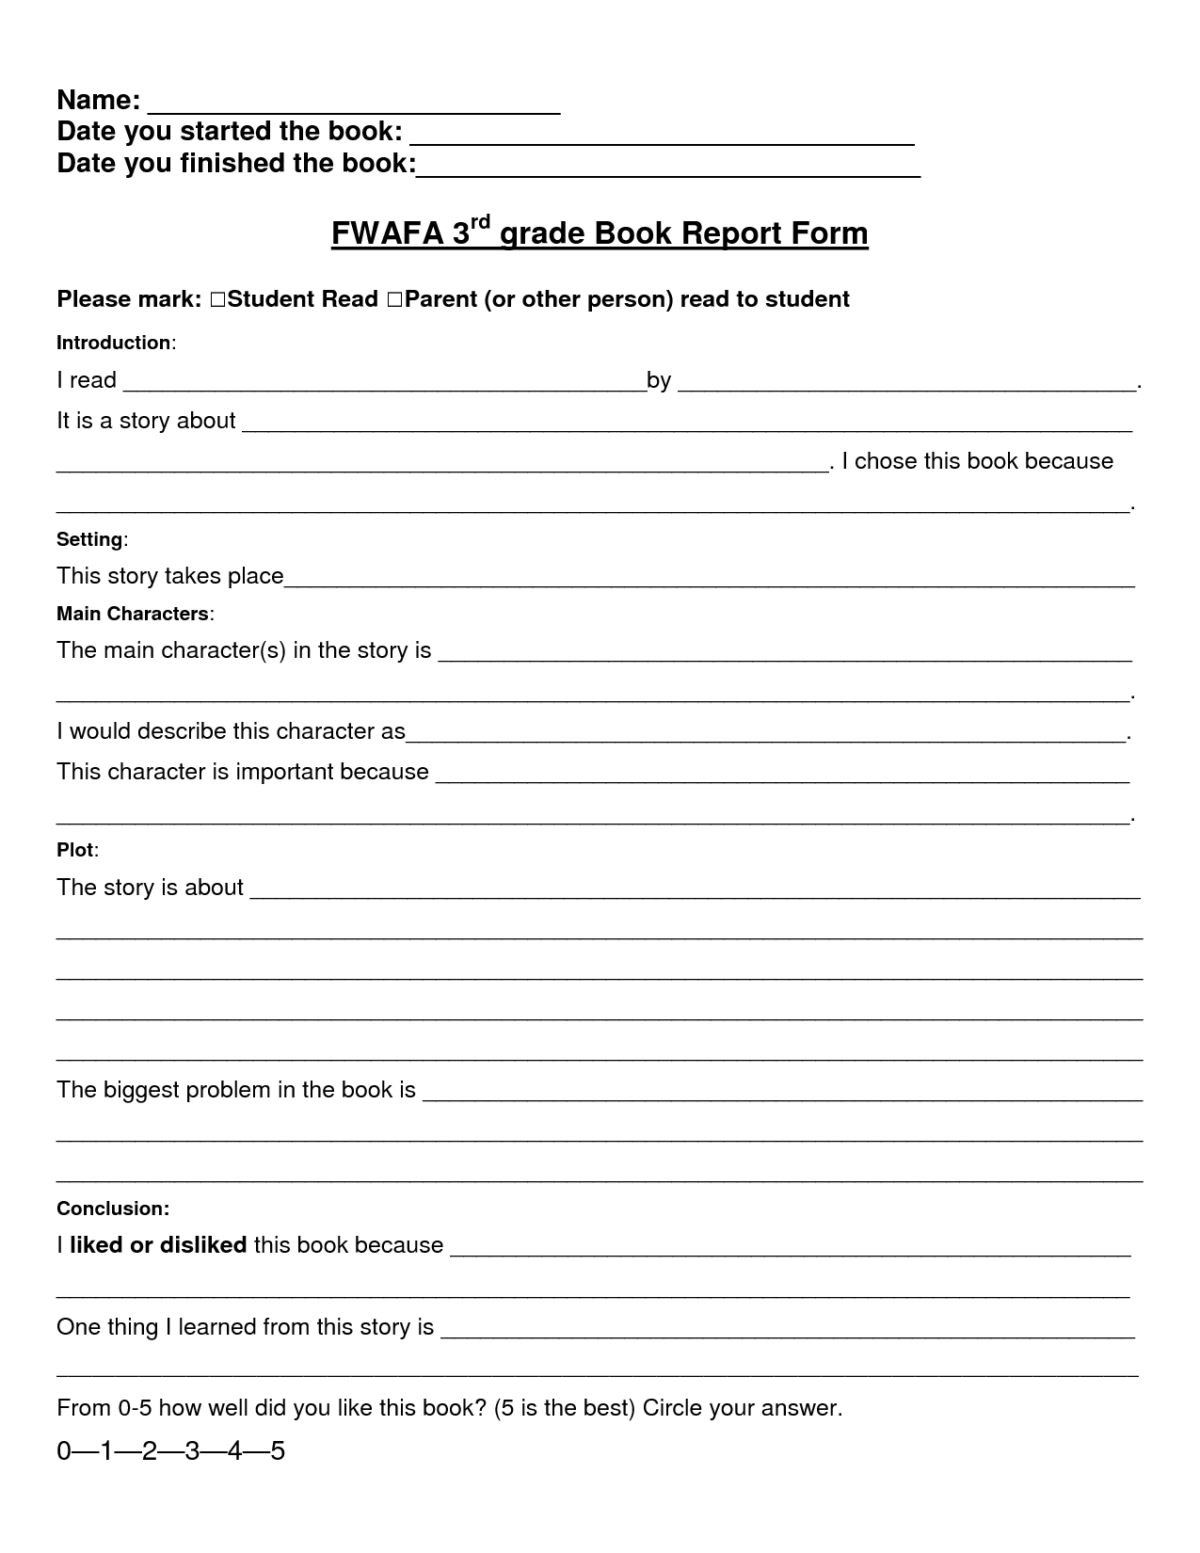 outlining-worksheet-grade-5-printable-worksheets-and-throughout-book-report-template-3rd-grade